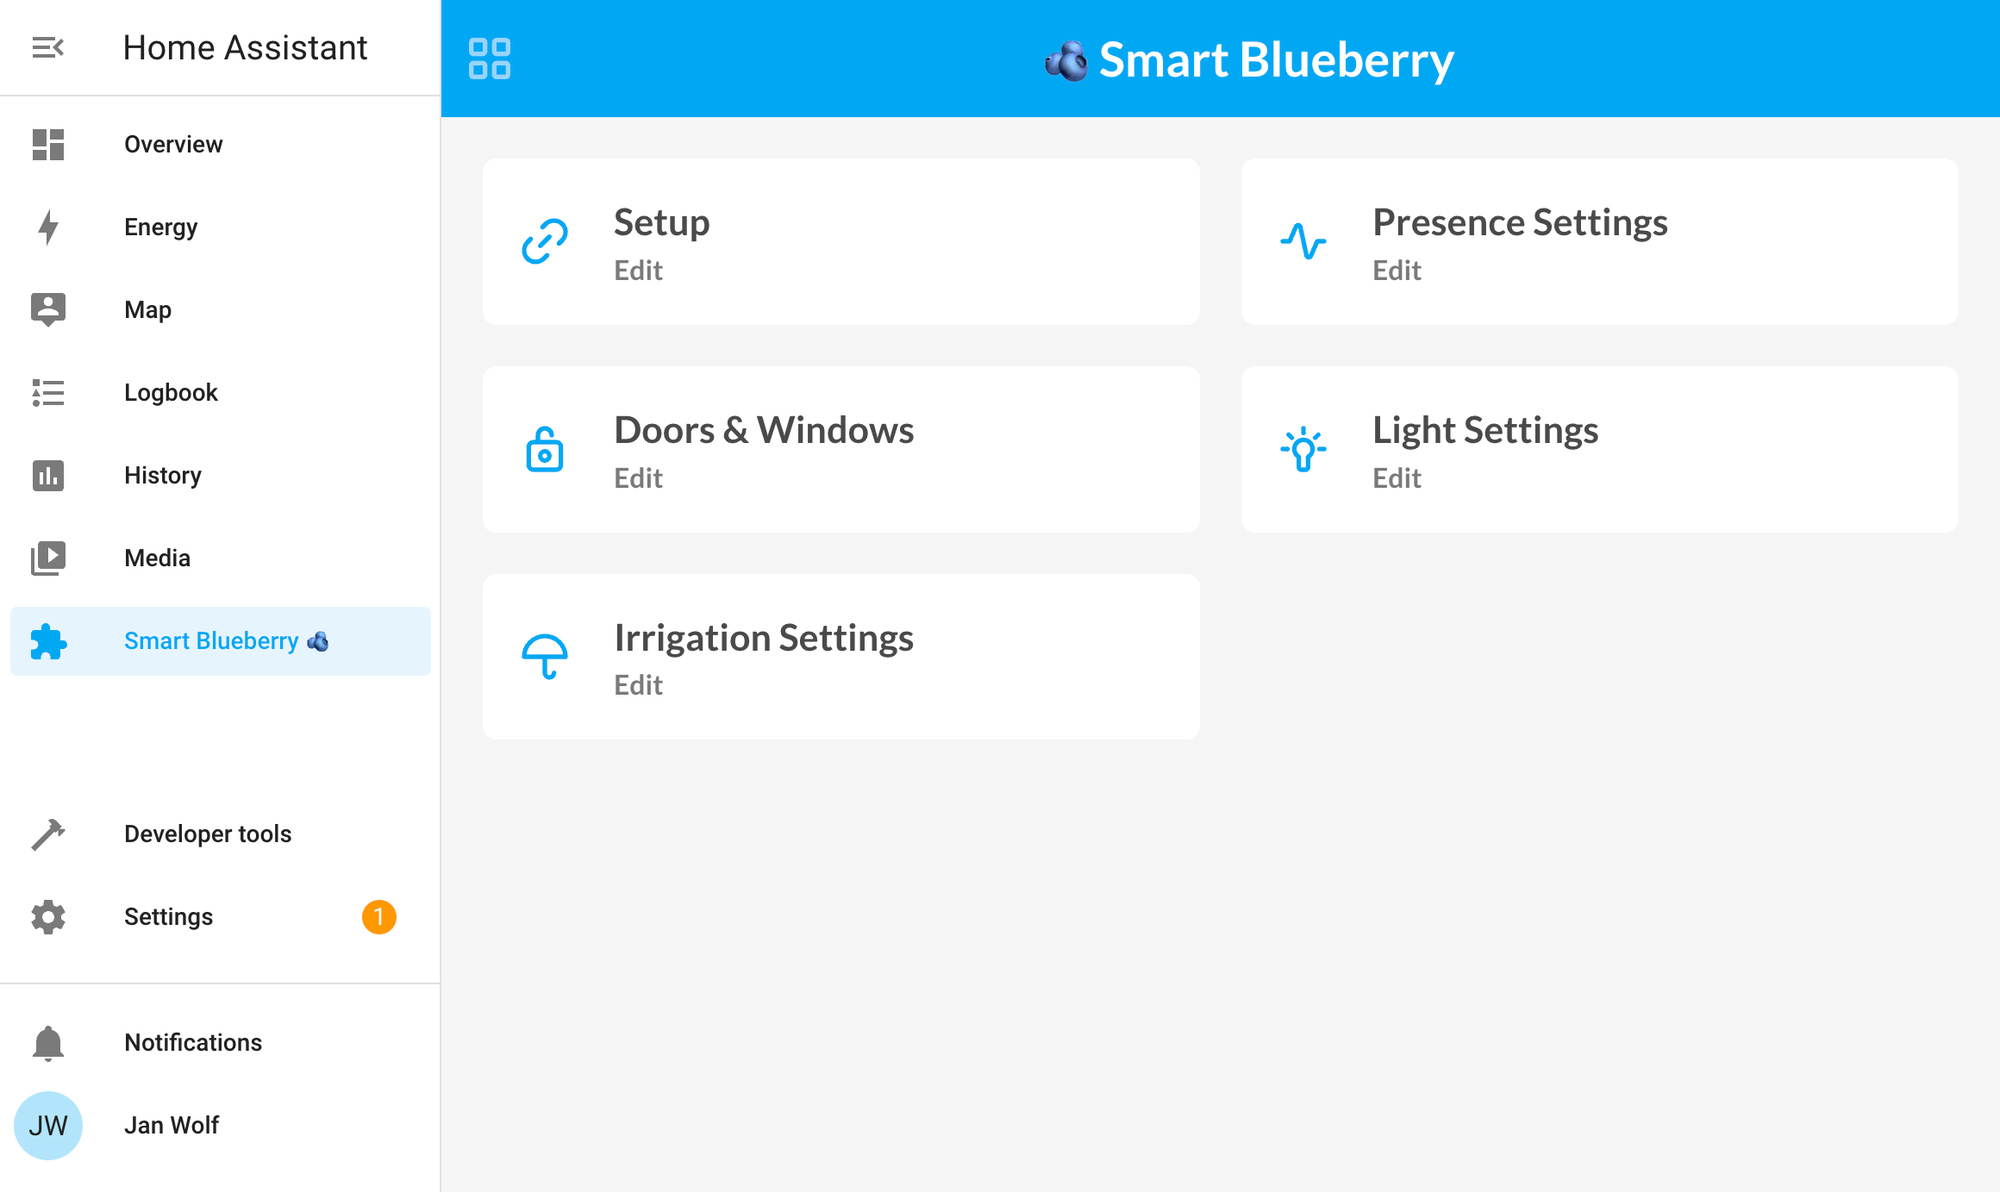 Smart Blueberry - Addon for Home Assistant